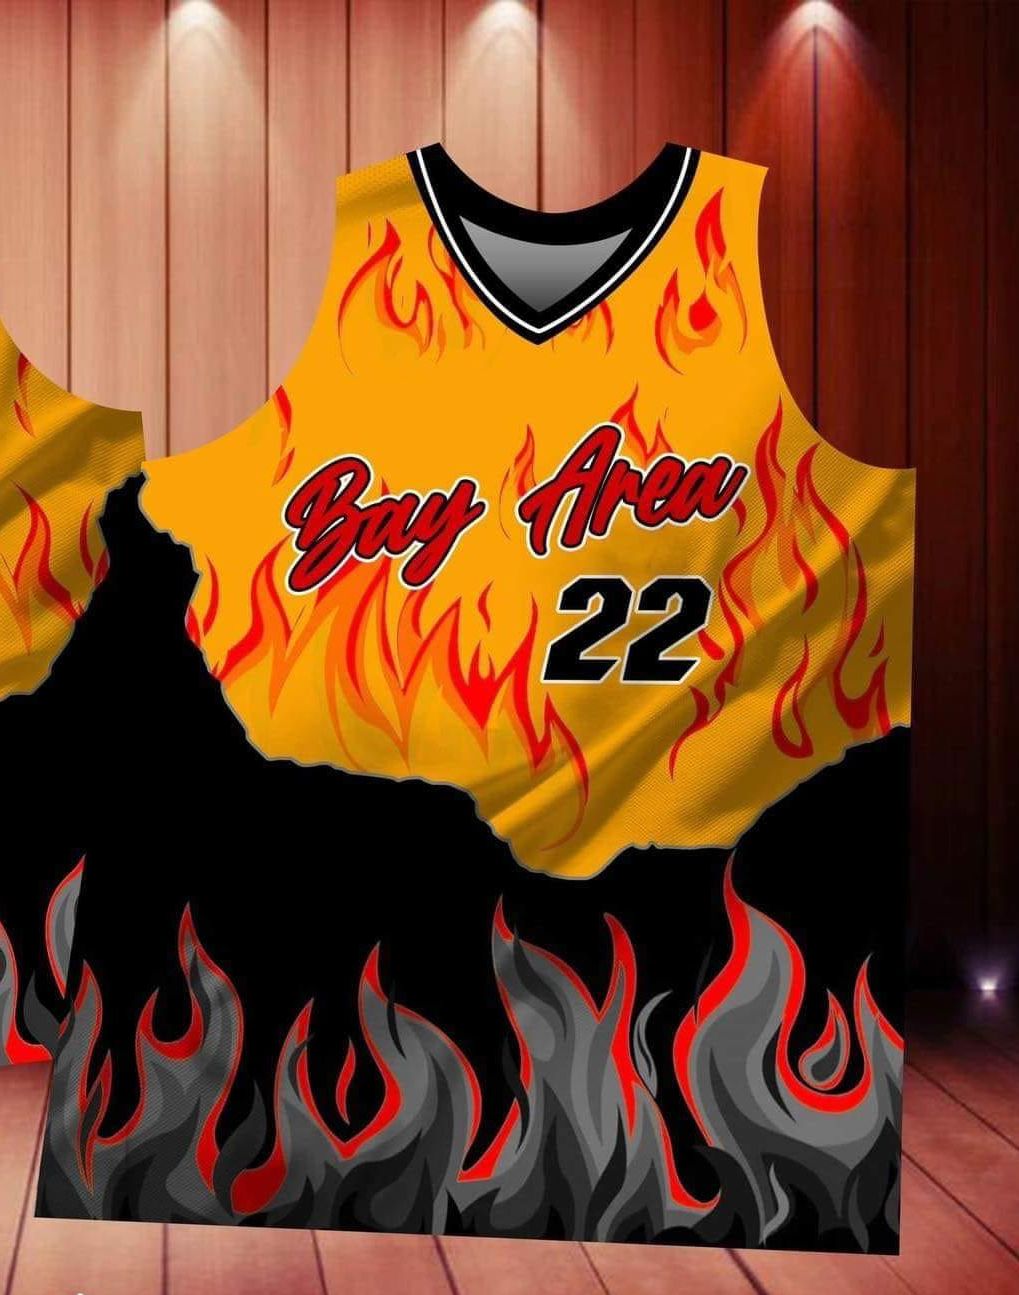 ❎ §OLD ❎ South City Vipers Basketball Jersey